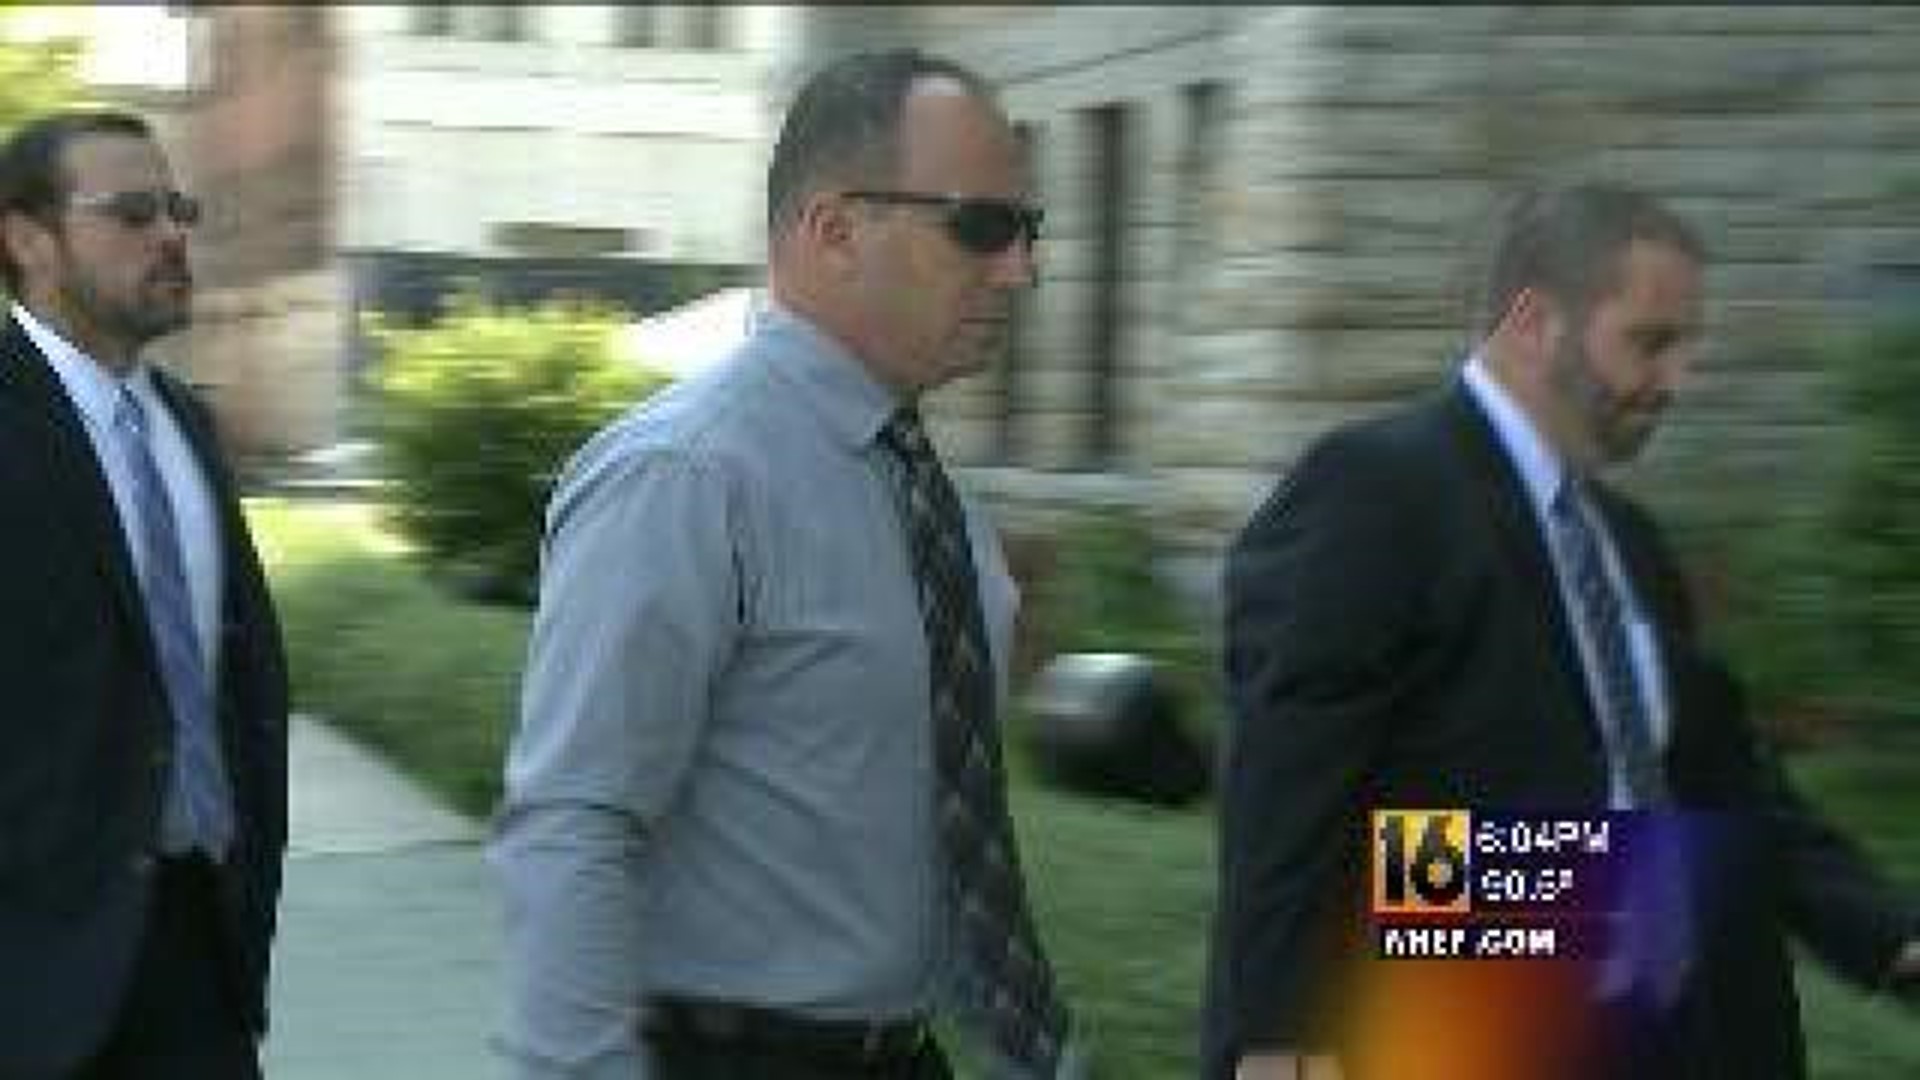 Charges Against Chief Headed to Trial